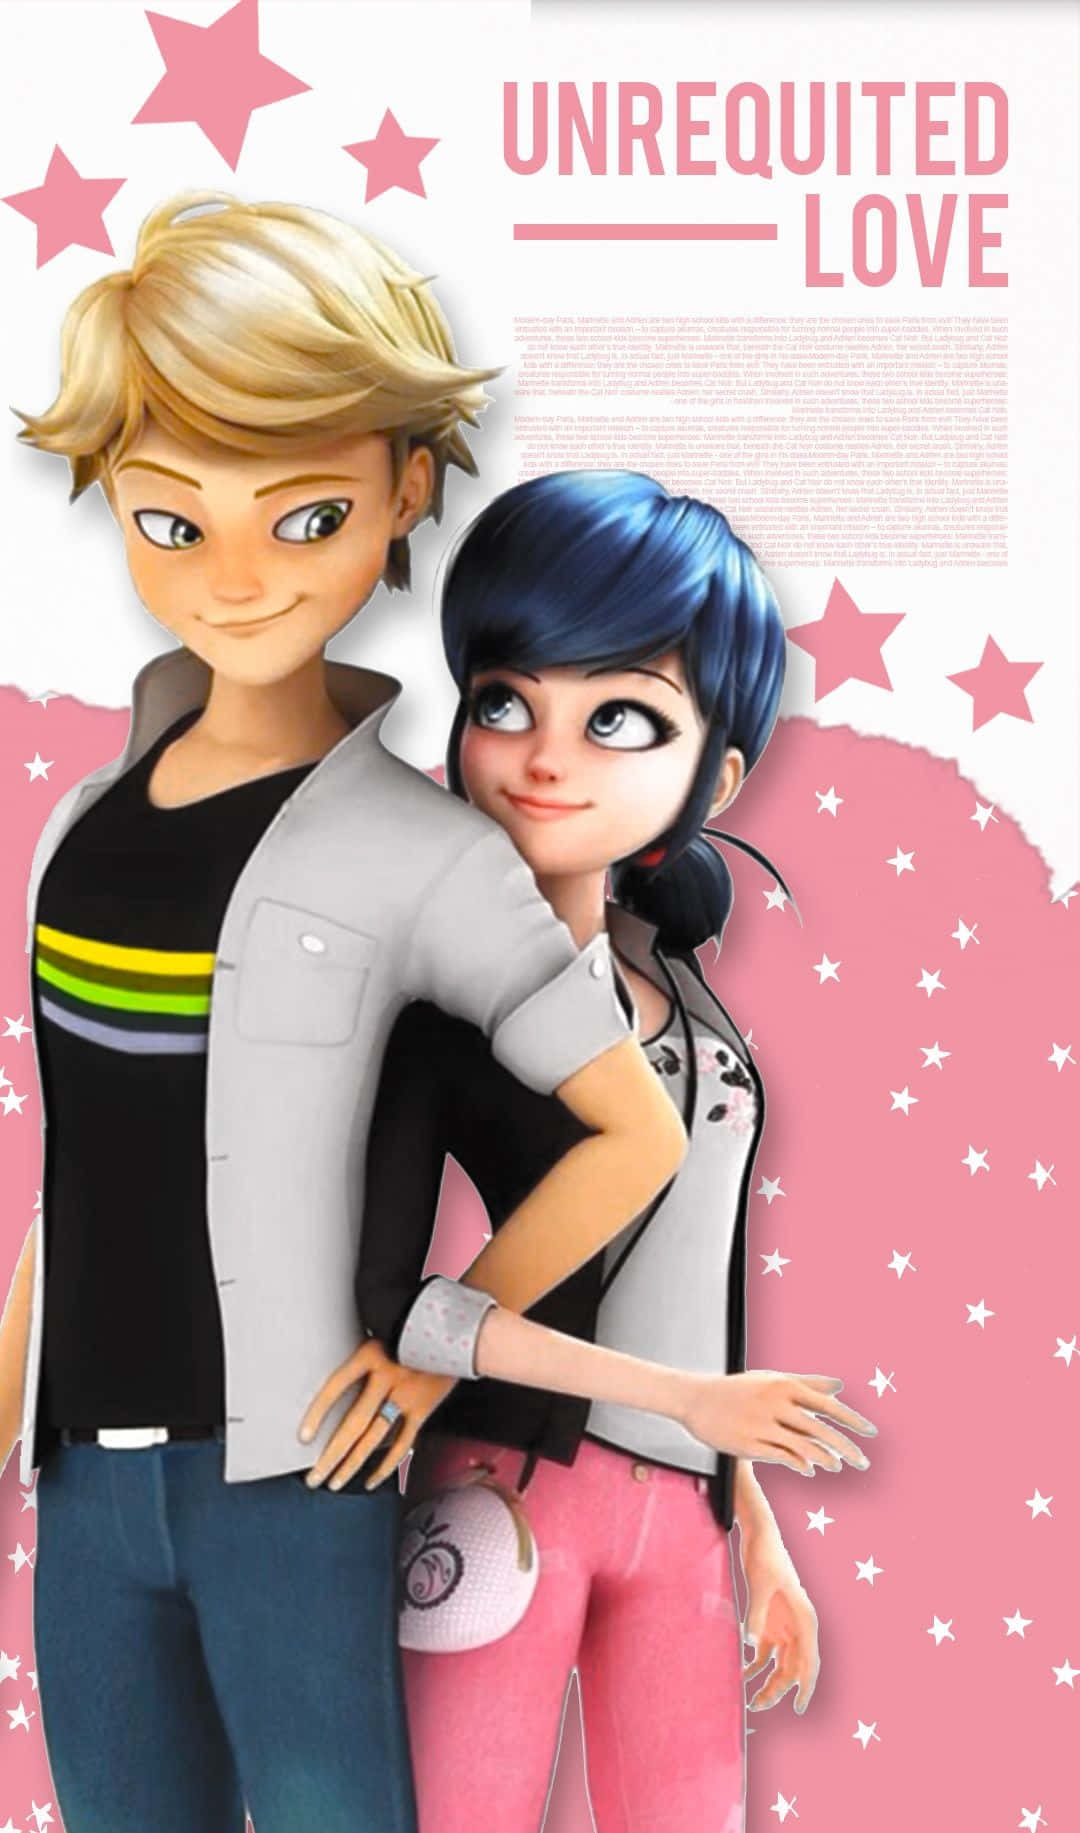 Caption: Charming Marinette smiling in her latest adventure